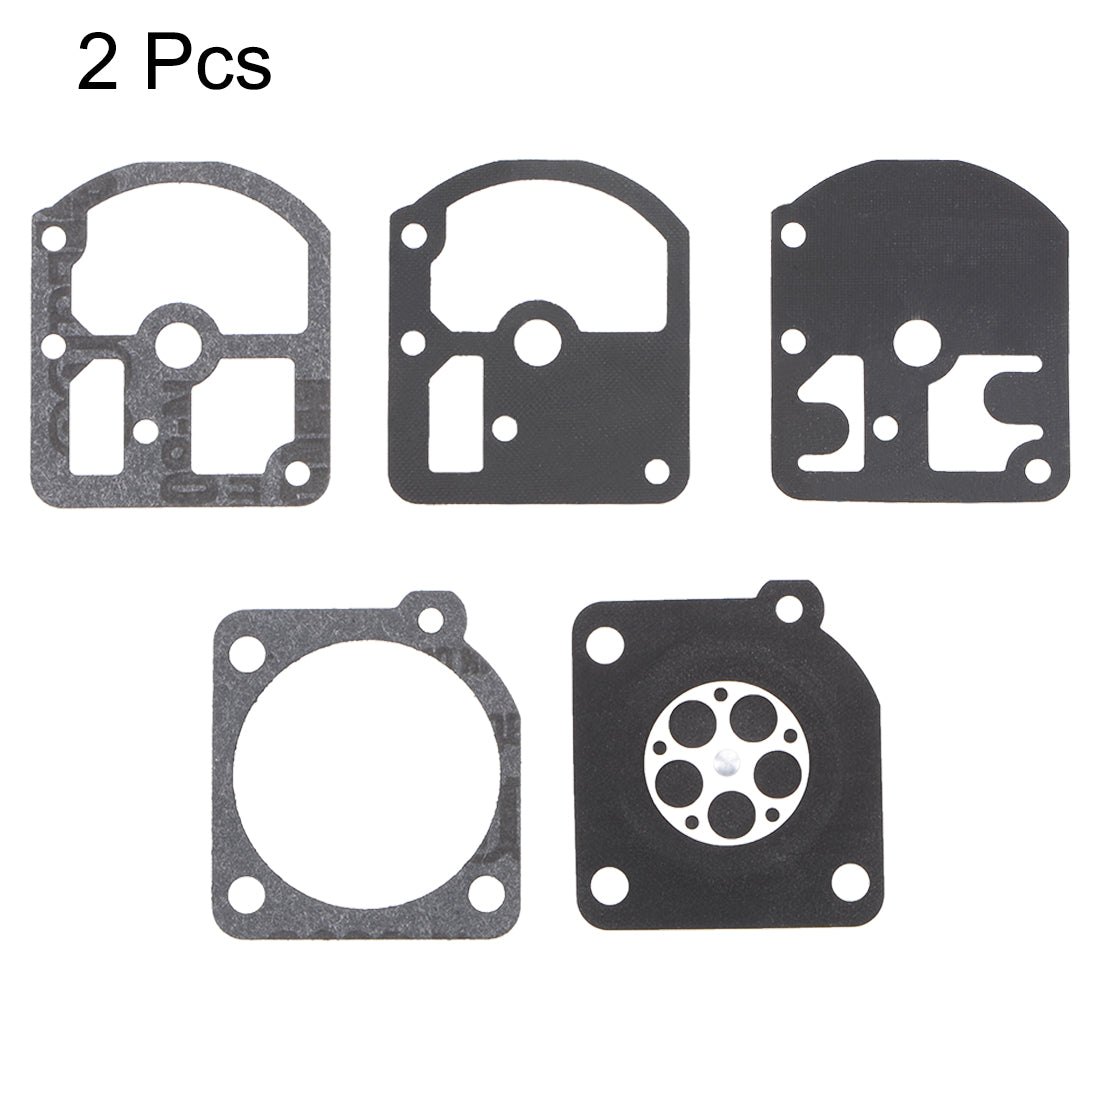 uxcell Uxcell RB-3uretor Rebuild Kit Gasket Diaphragm for RB-3 Series Chainsaw Engines 2pcs